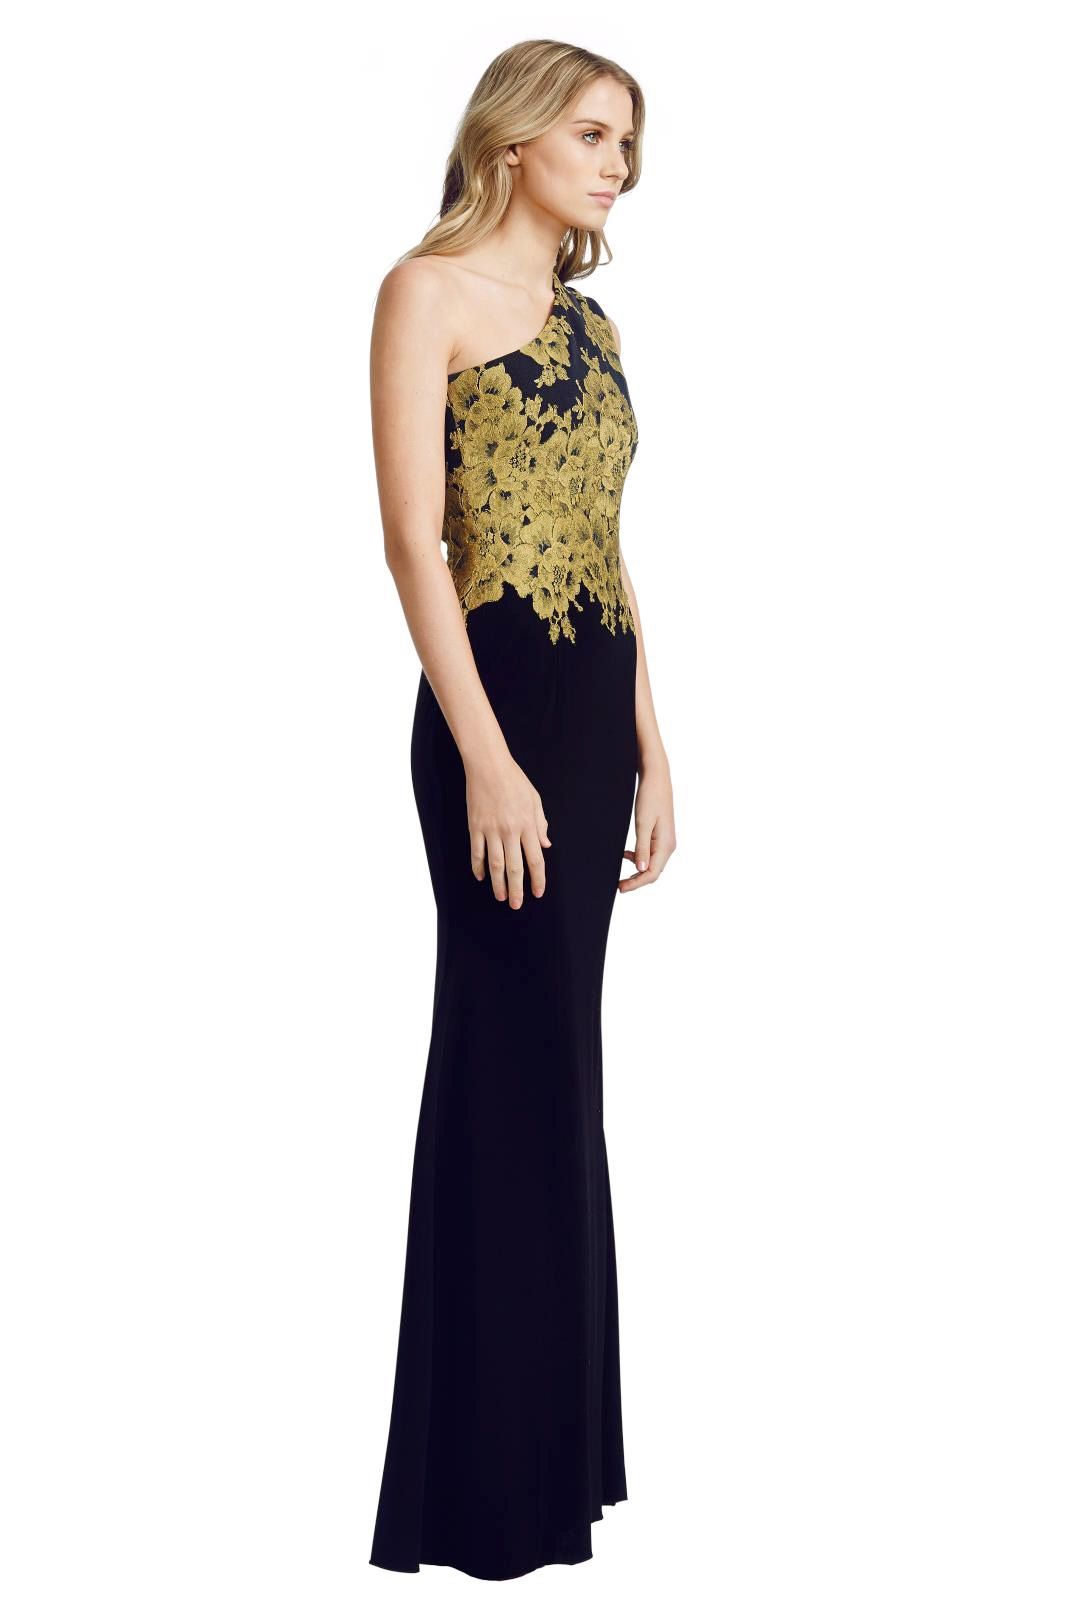 Alex Perry - Darcelle Gown - Black - Side